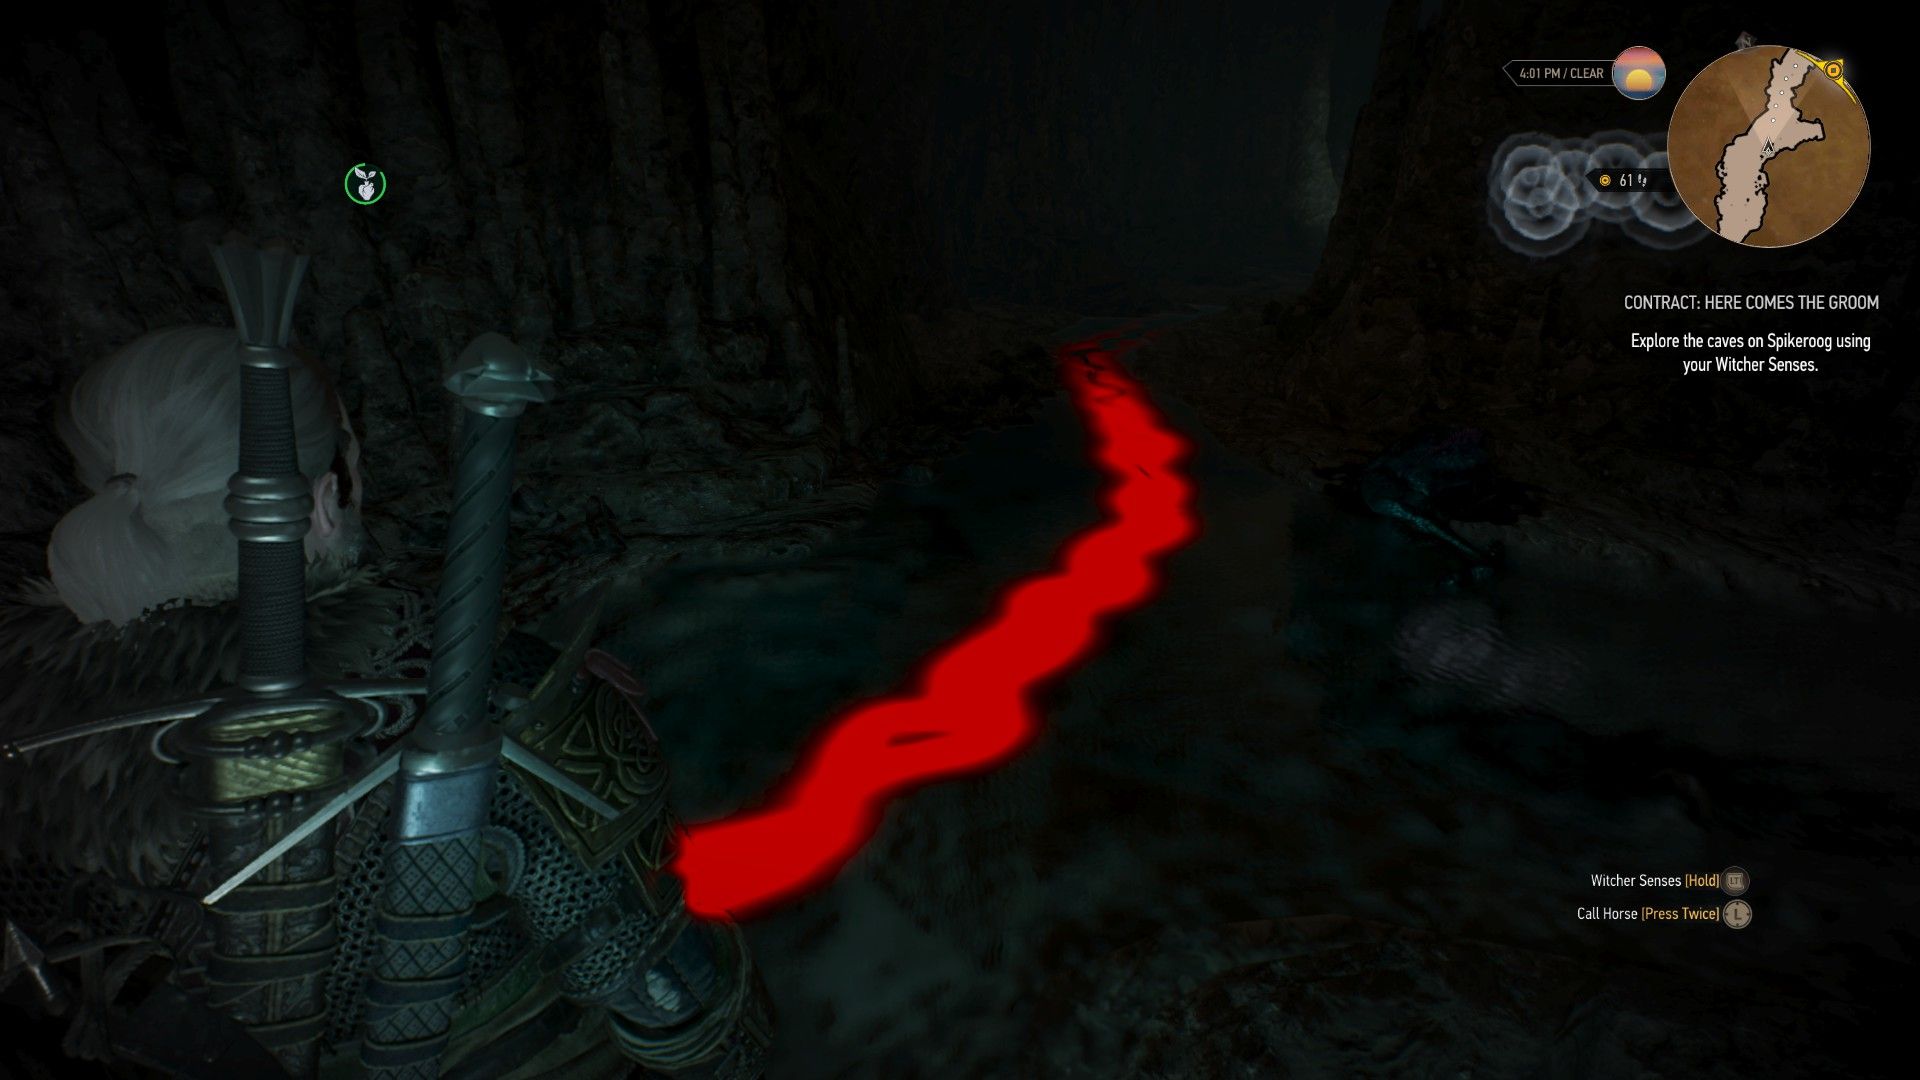 Screenshot from Geralt's Witcher Senses, highlighting the trail left by the monster in the dark cave.